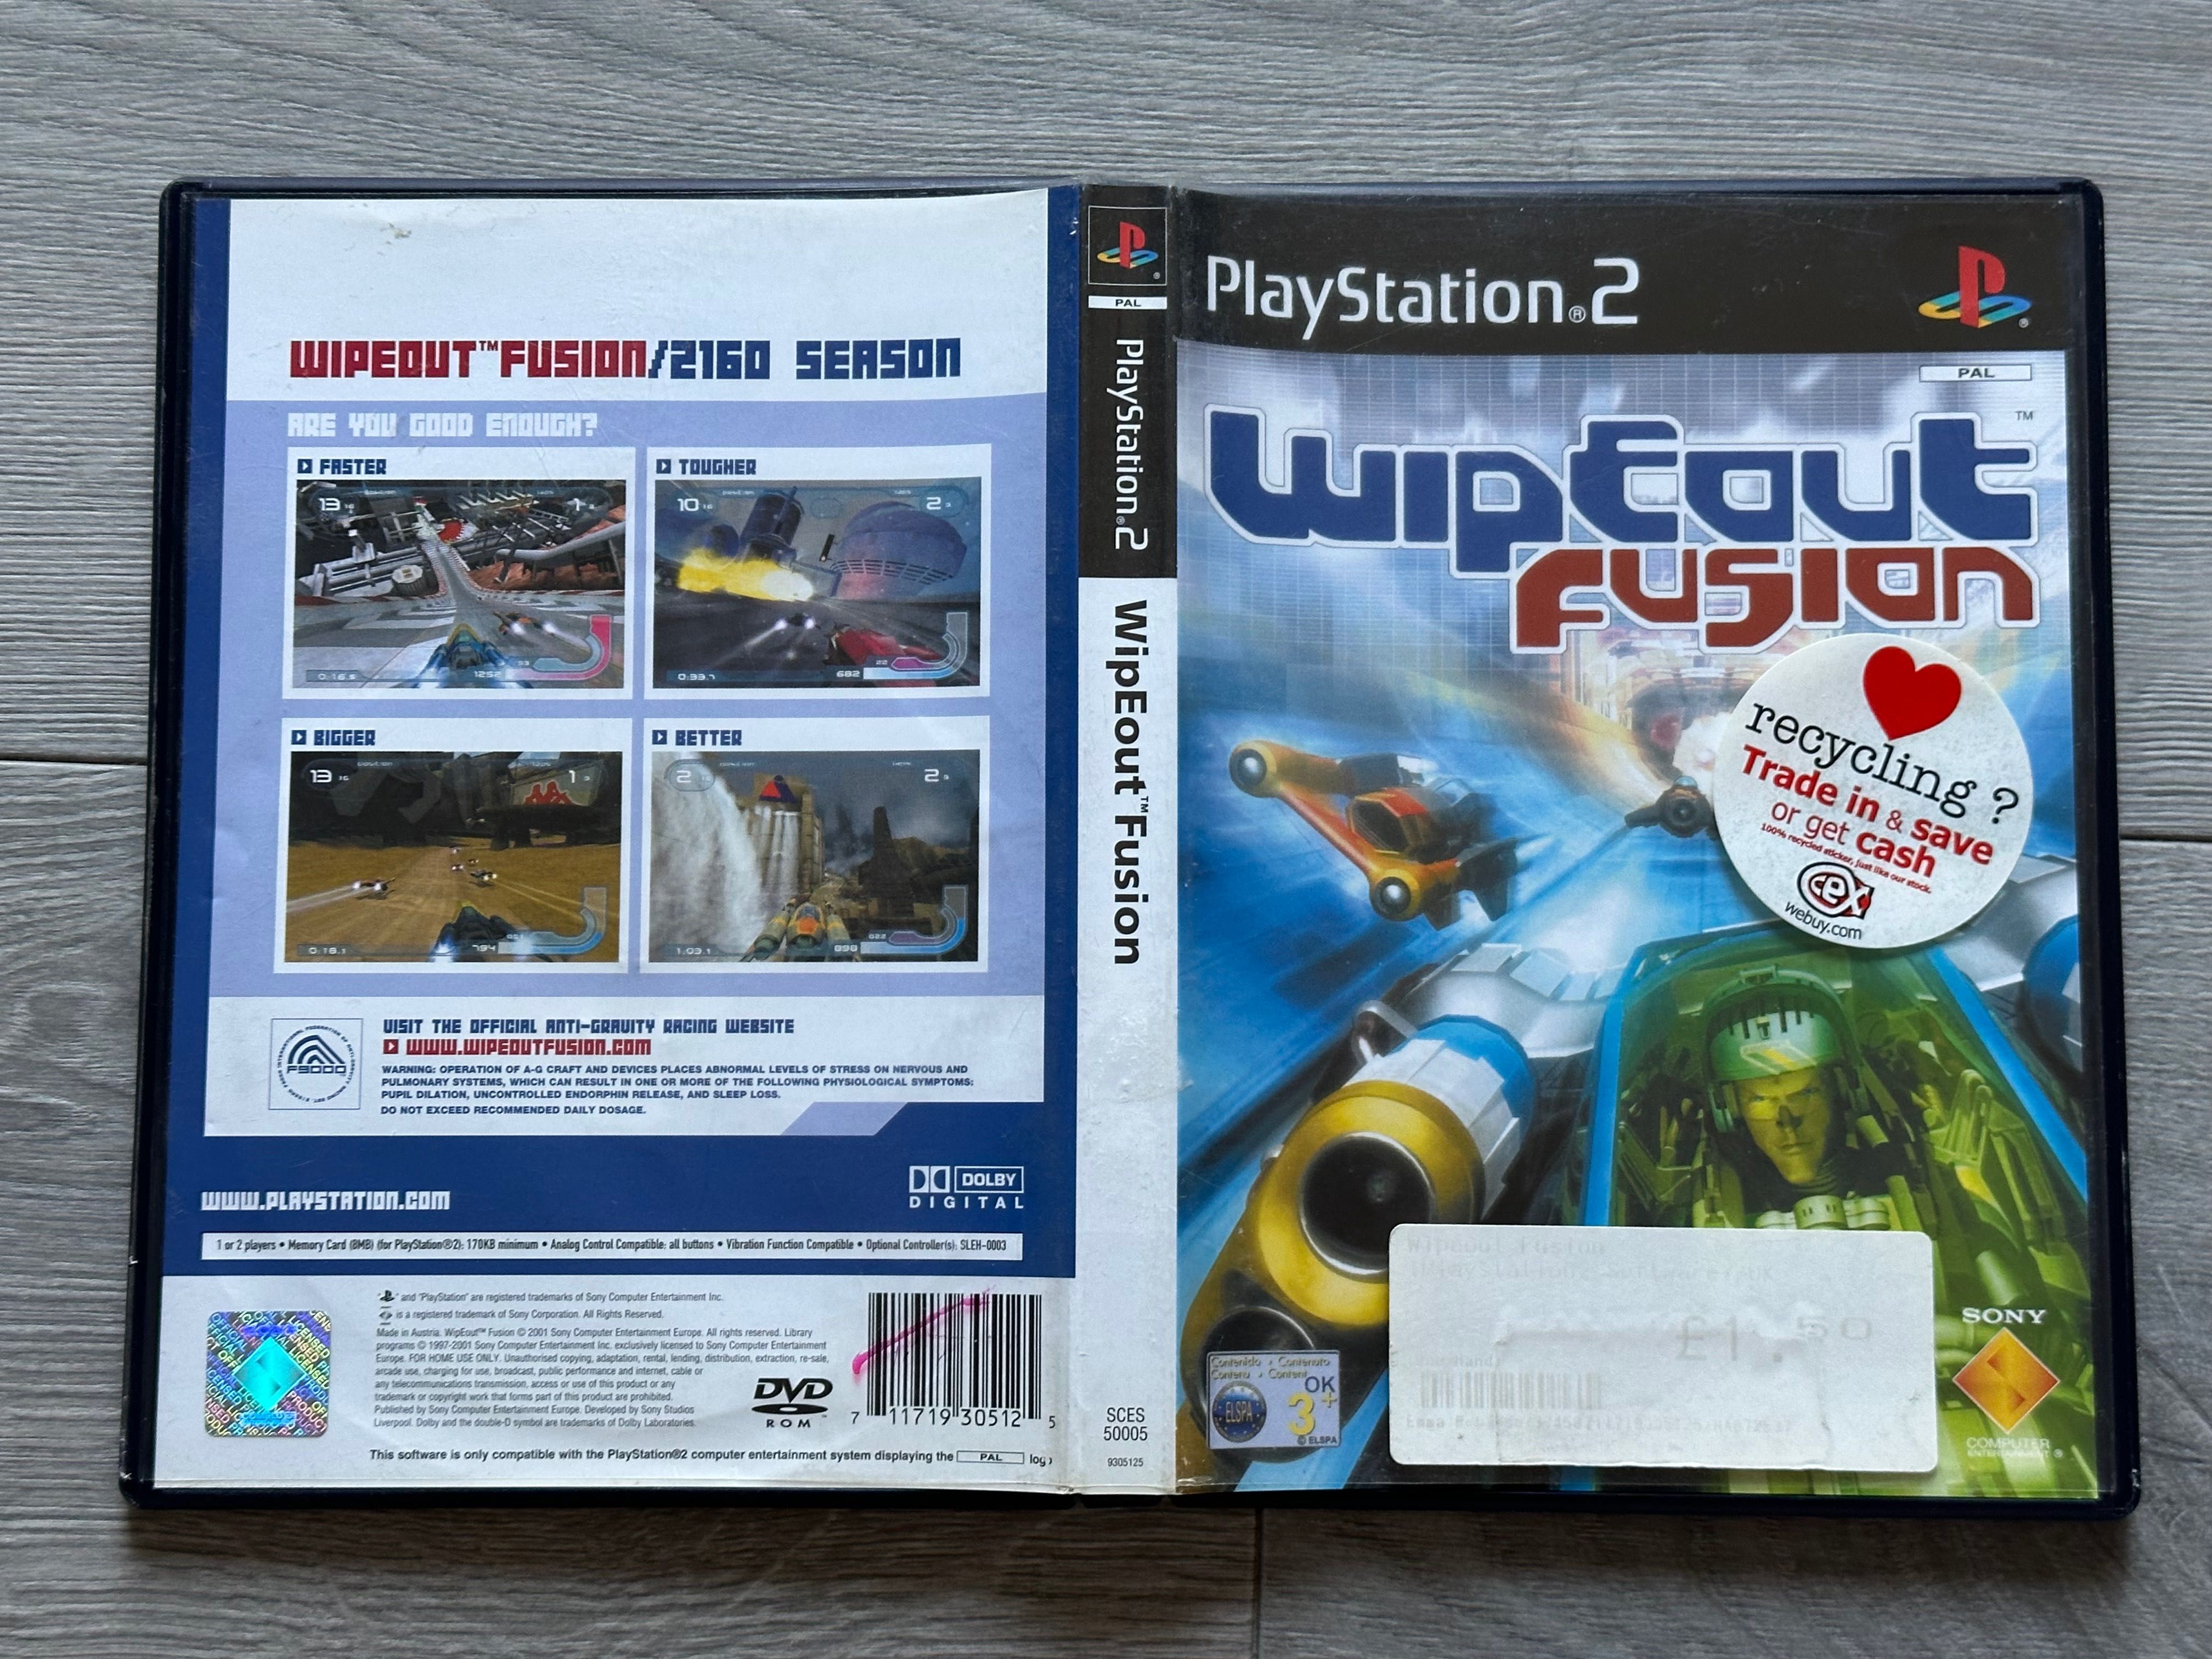 Wipeout Fusion / Playstation 2